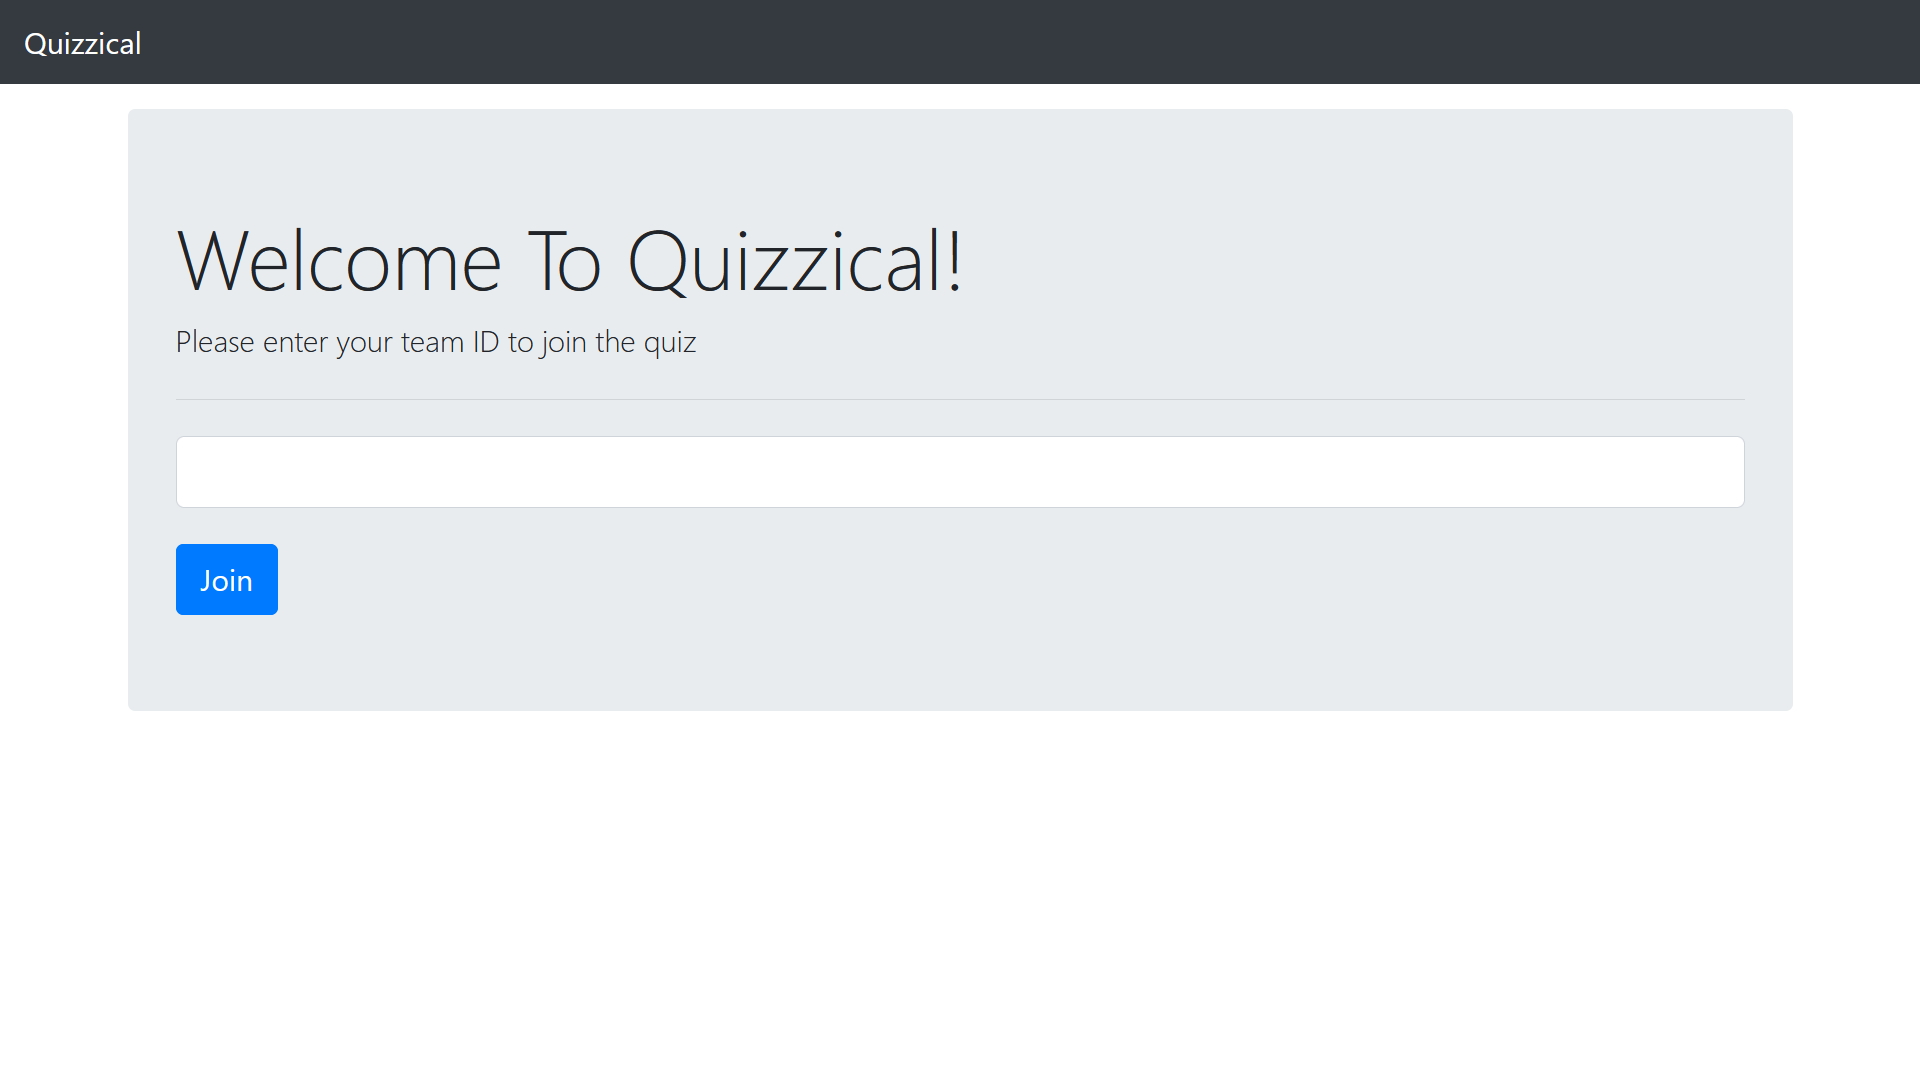 A screenshot from a website called "Quizzical". A text entry box is shown in the centre of the screen, with a join button below it. Above it is the instruction "Please enter your team ID to join the quiz".